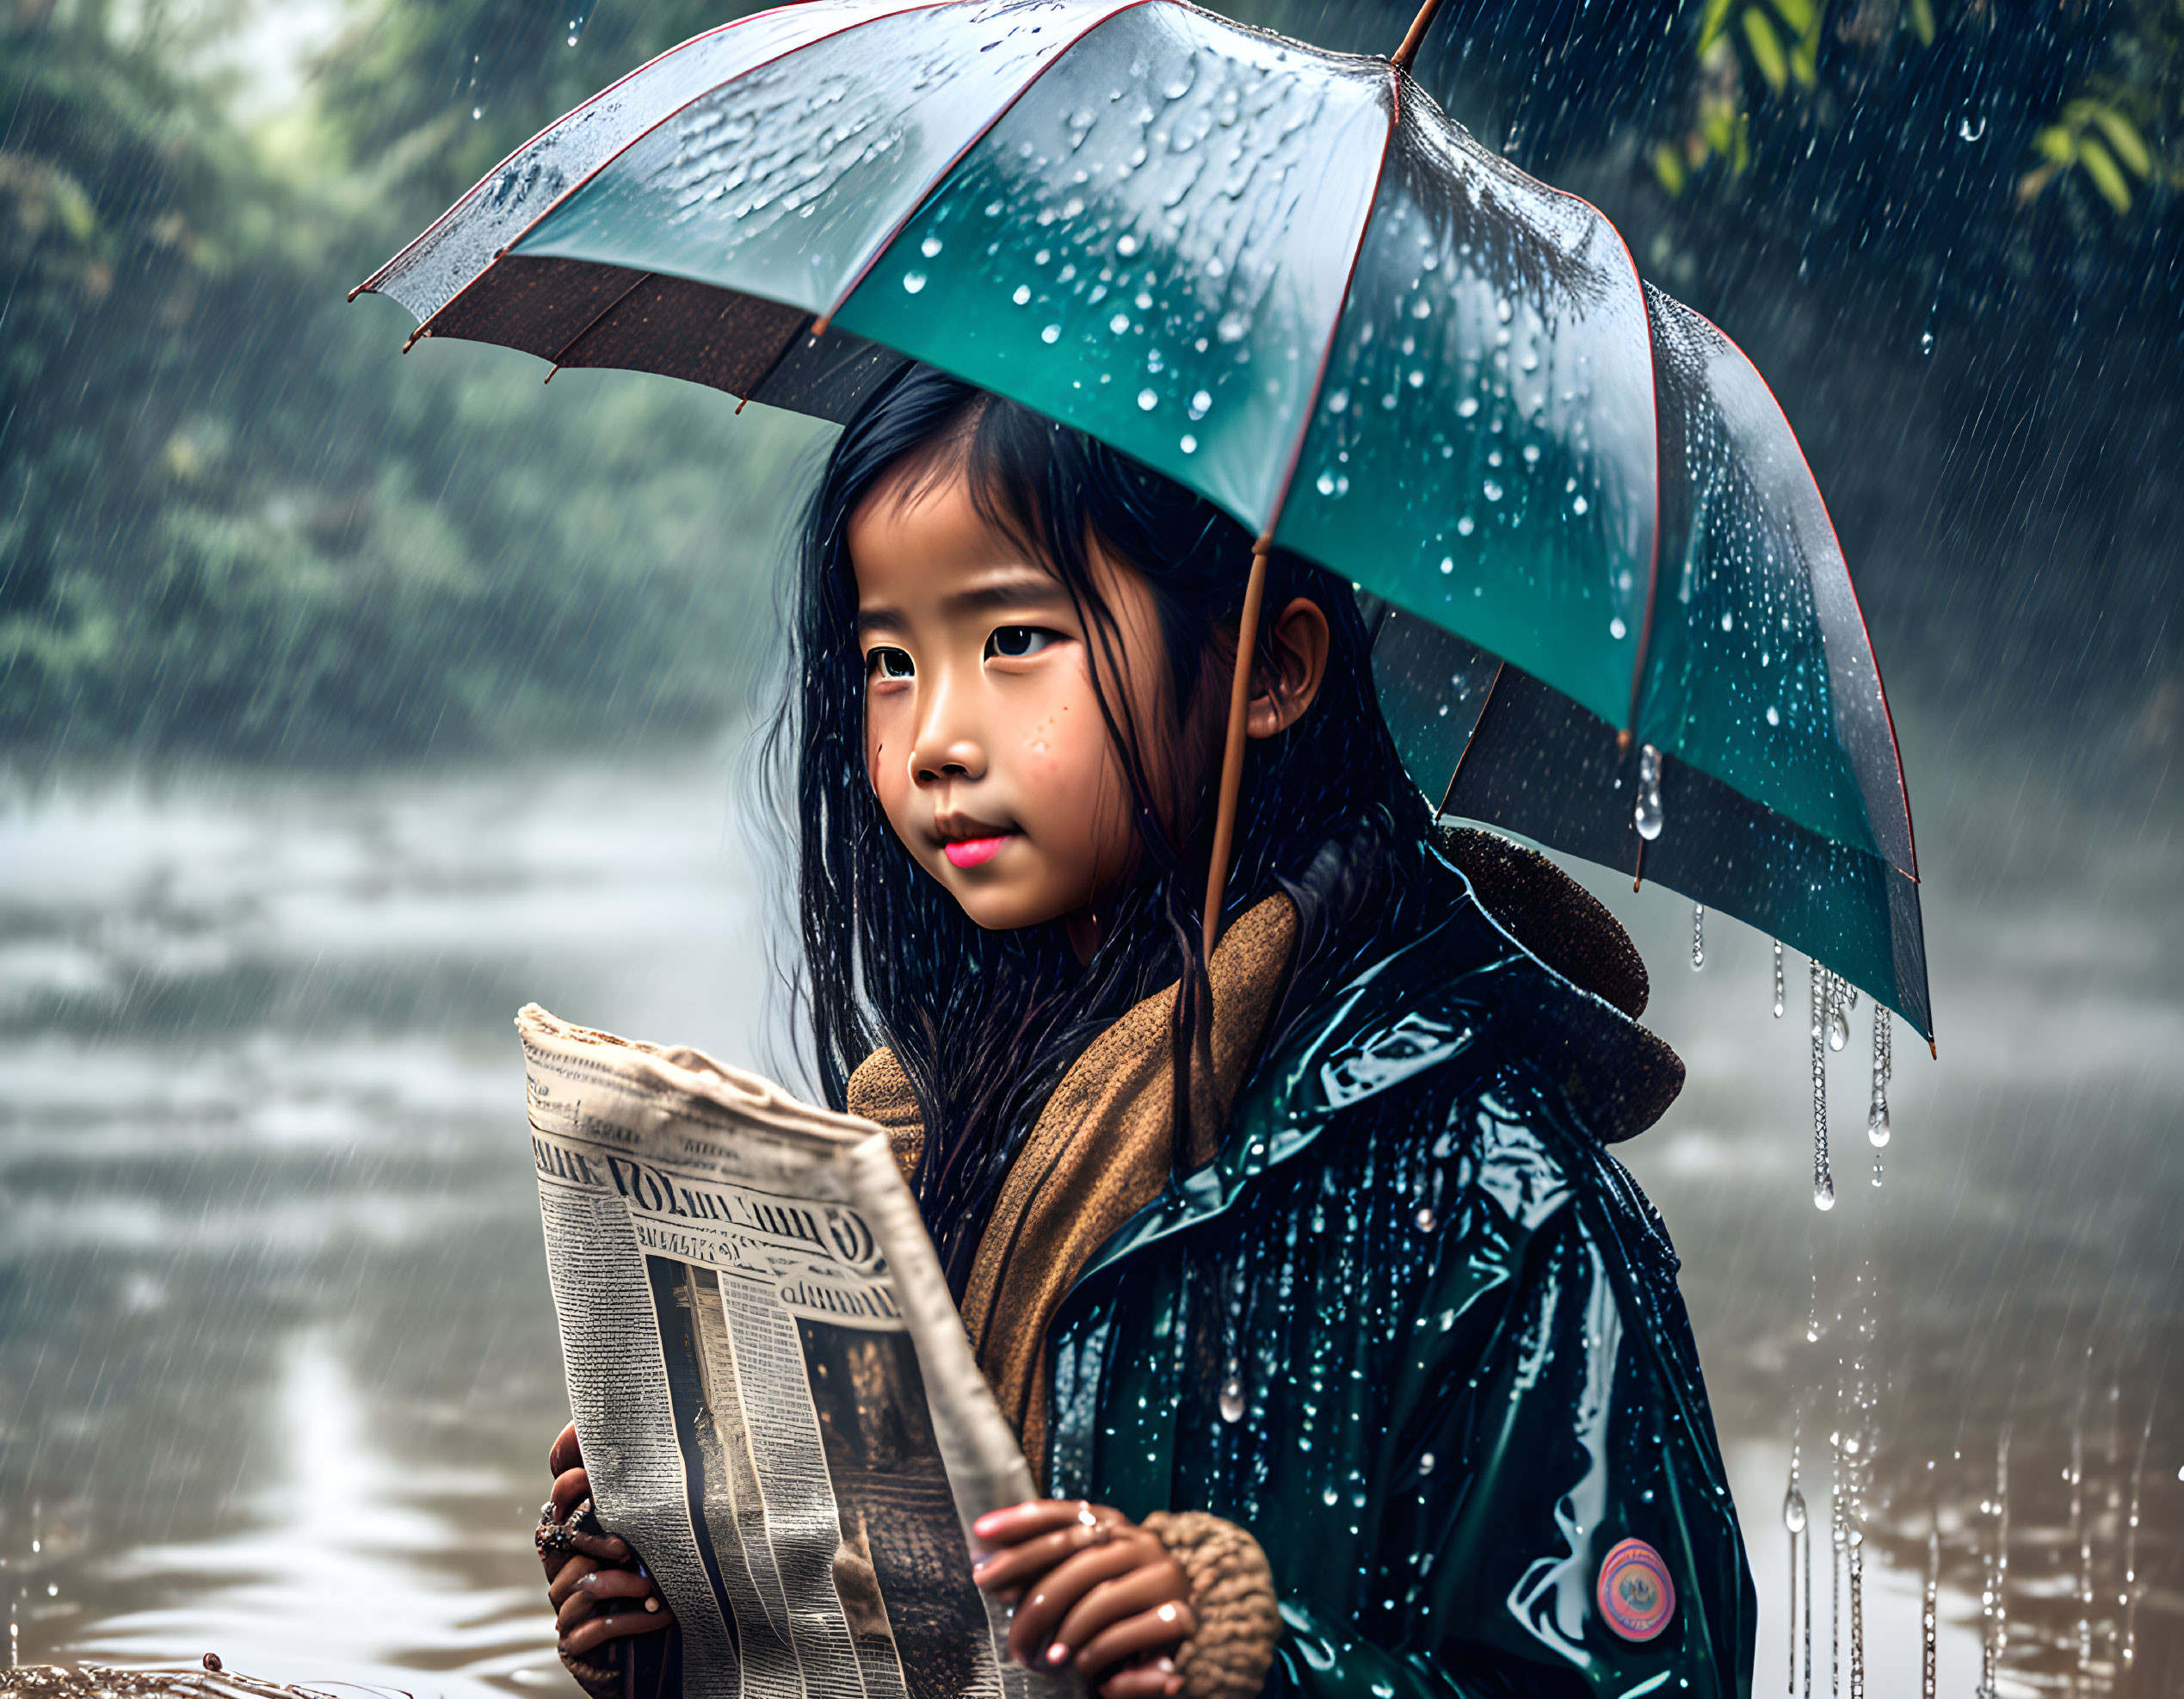 Young girl with umbrella in rain holding newspaper